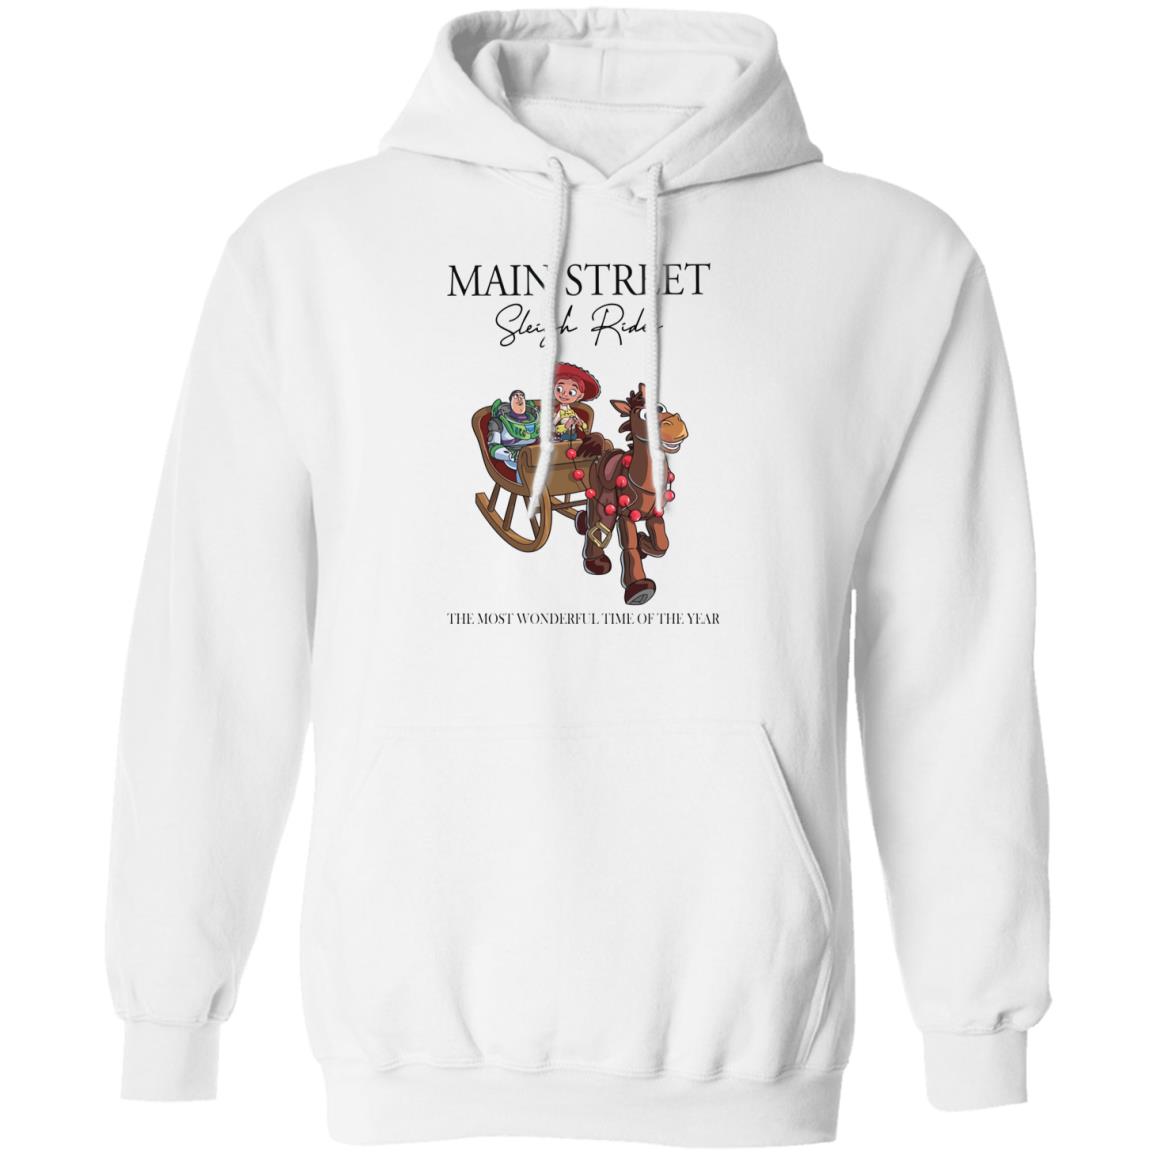 Main Street Sleigh Rides The Most Wonderful Time Of The Year Shirt 1